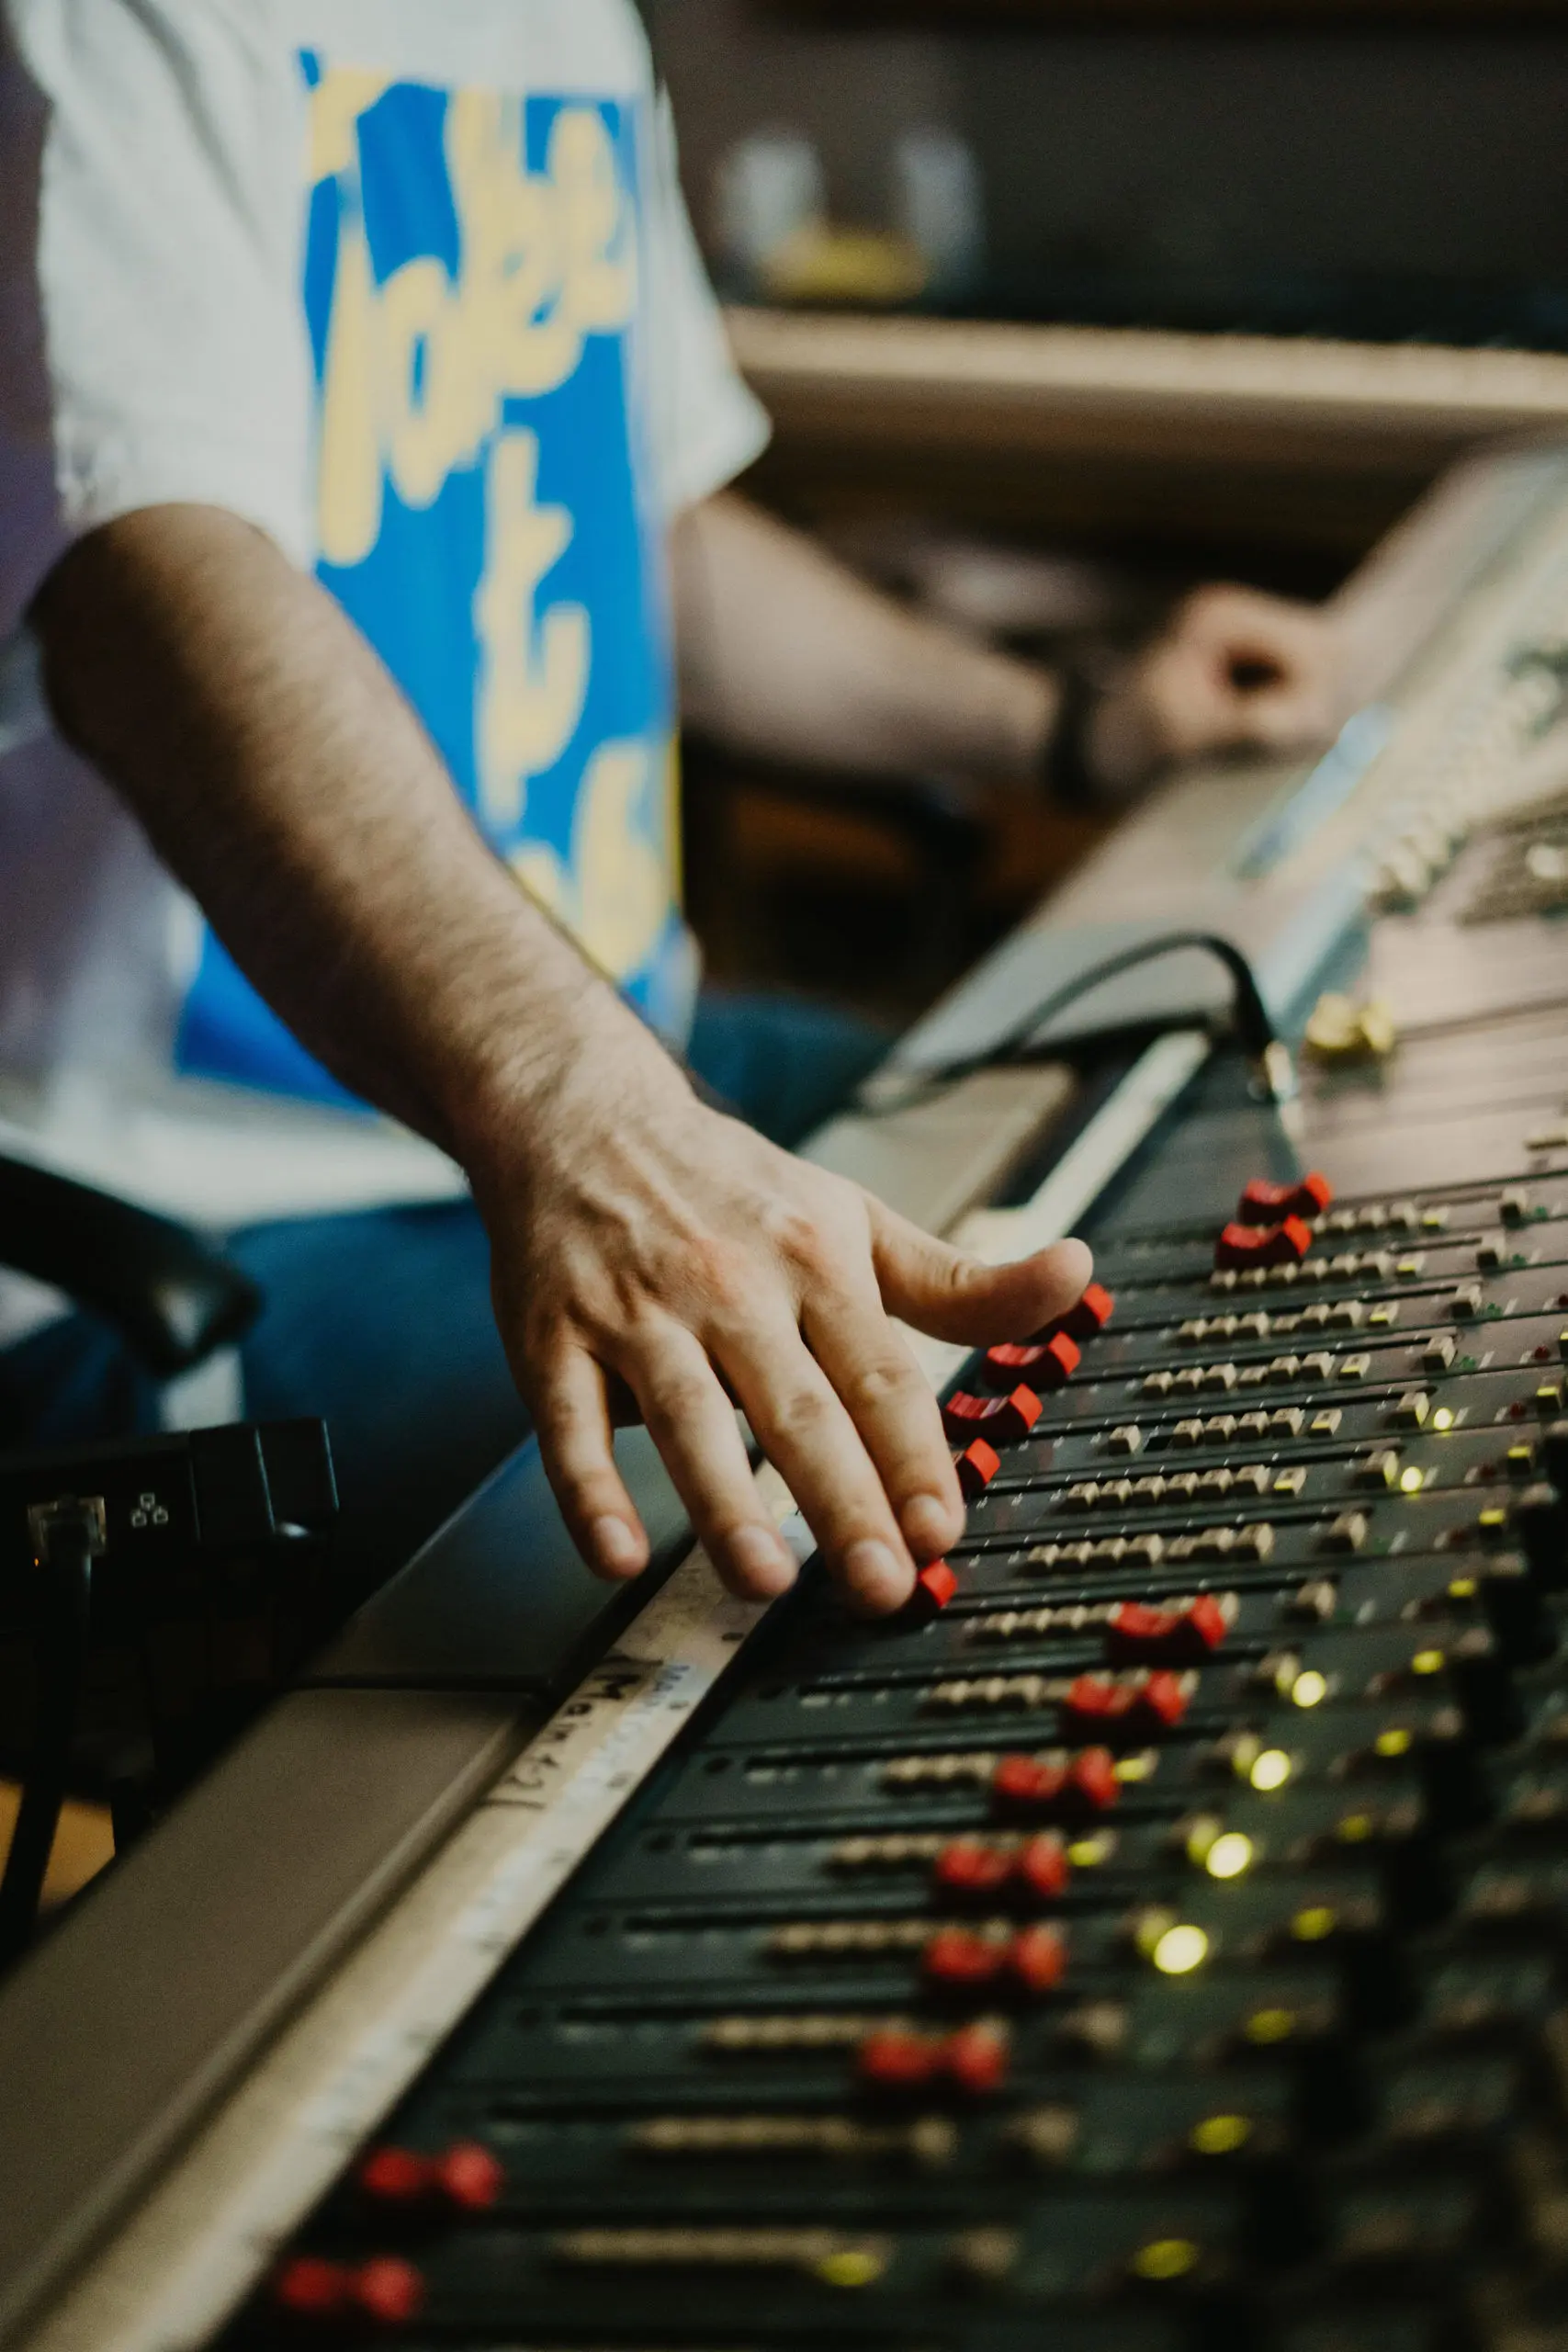 Get the full insights on whether audio engineering will result in a rewarding and stable lifelong career choice.